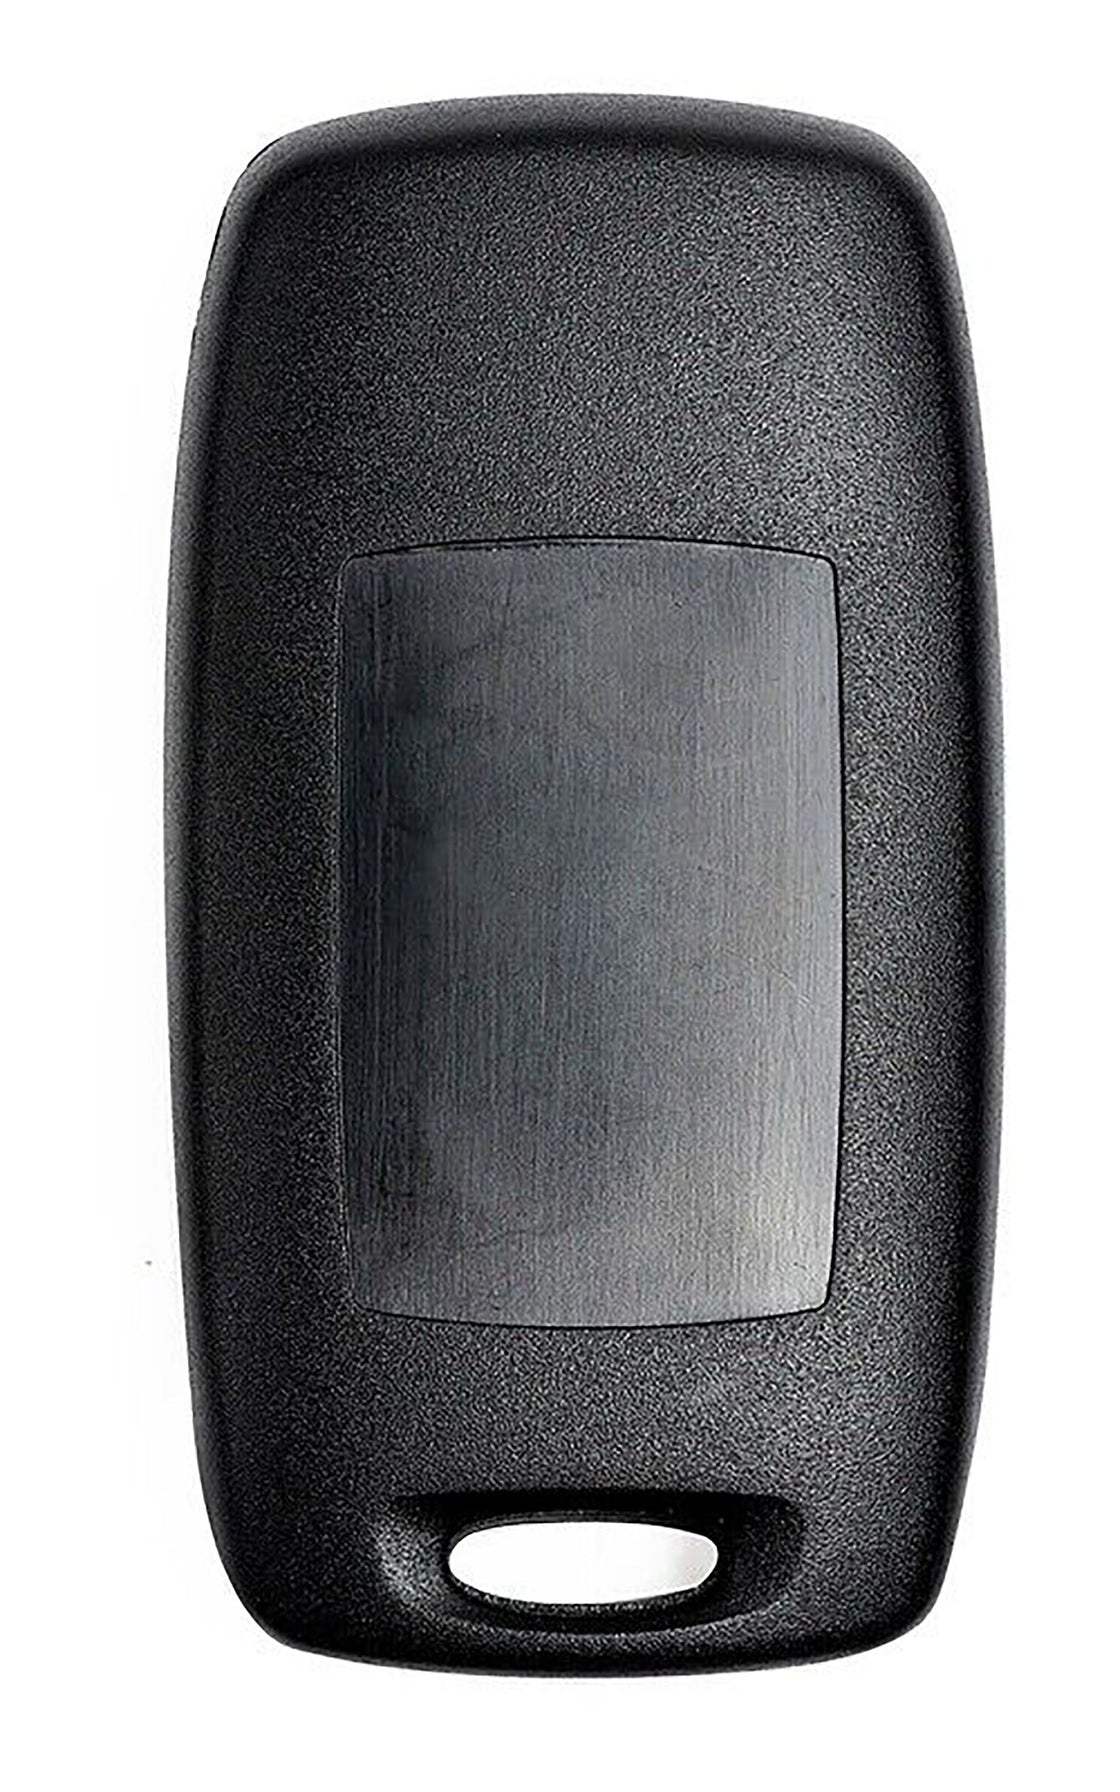 1x New Replacement Key Fob Remote Compatible with & Fit For Mazda Vehicles (Read Description) - MPN KPU41704-02